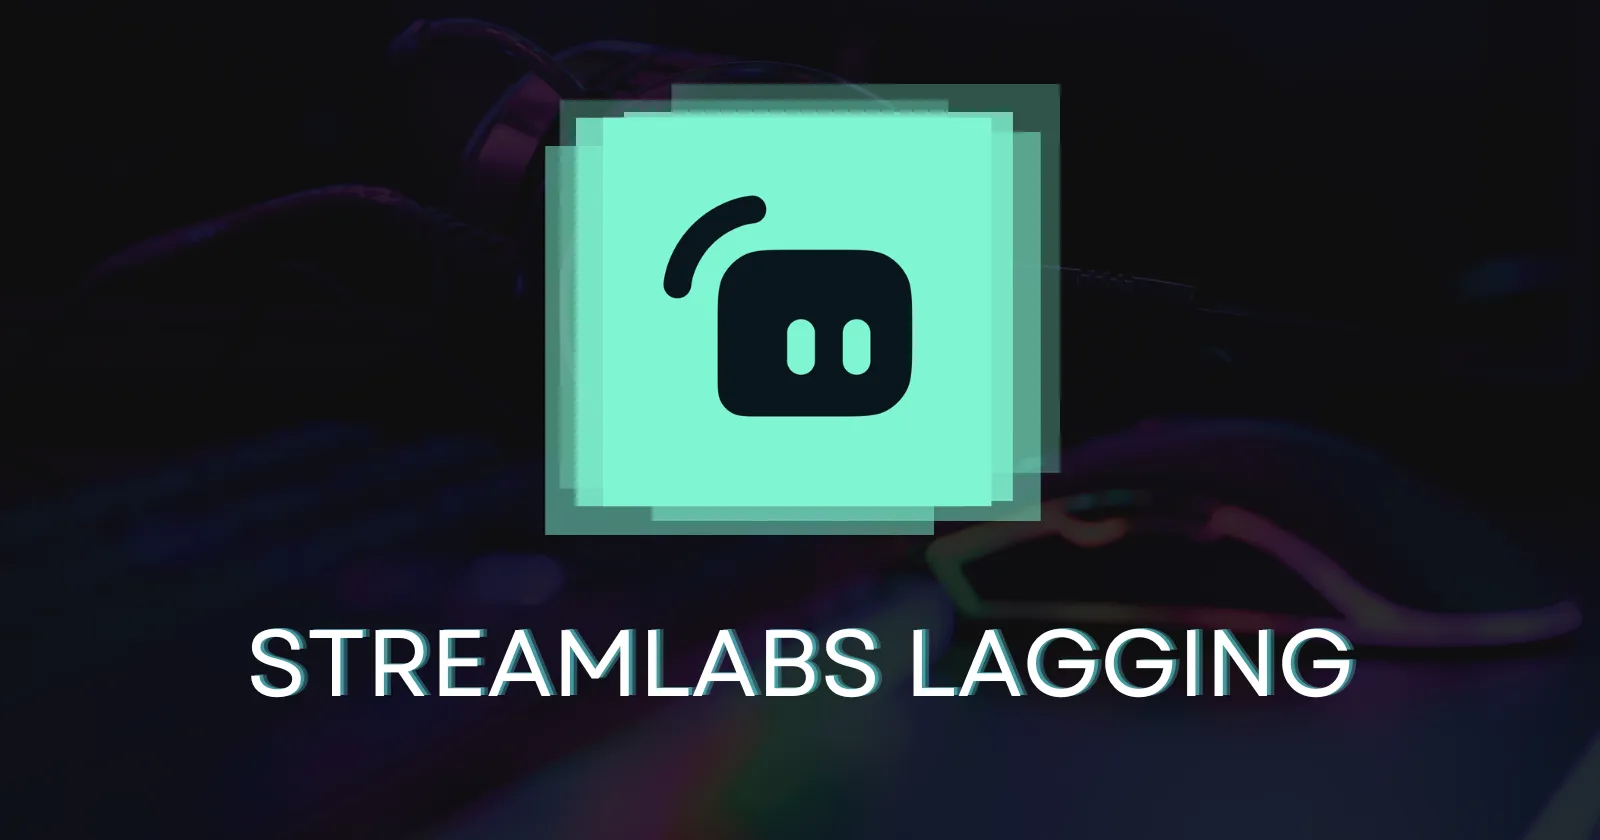 How to Fix Streamlabs Lagging